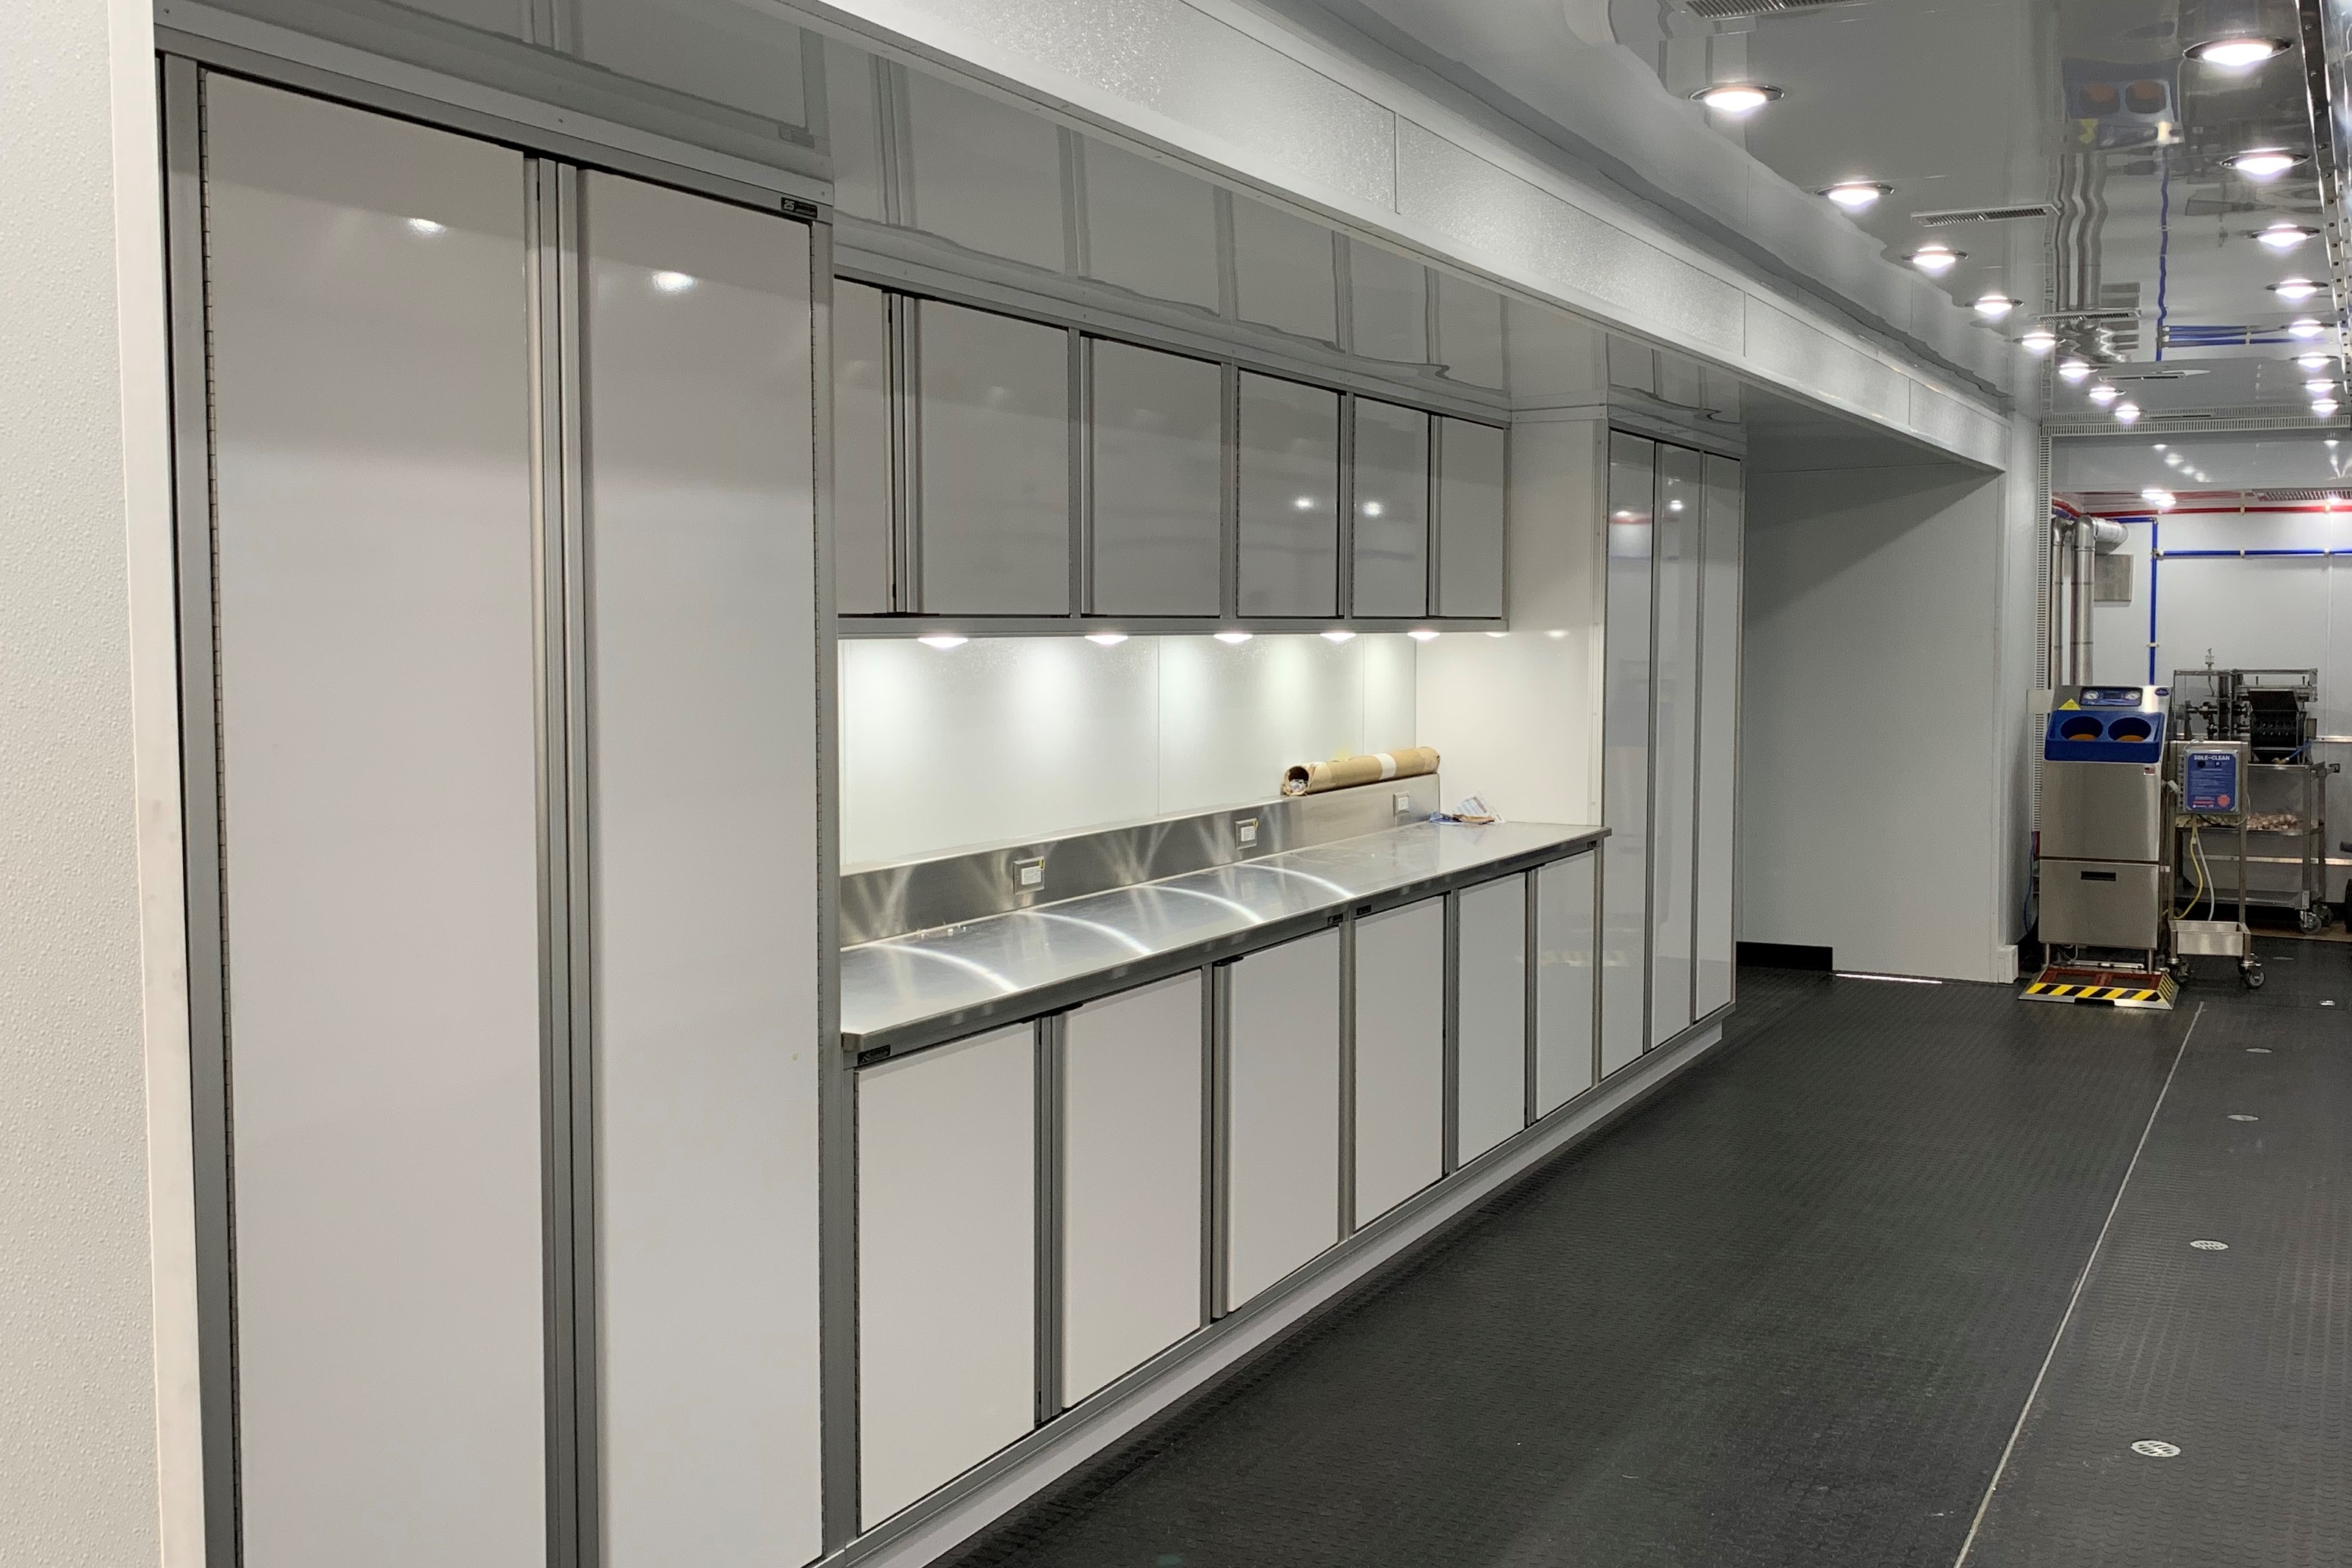 Mobile-food-processing-lab-prep-space-storage-inside-view 